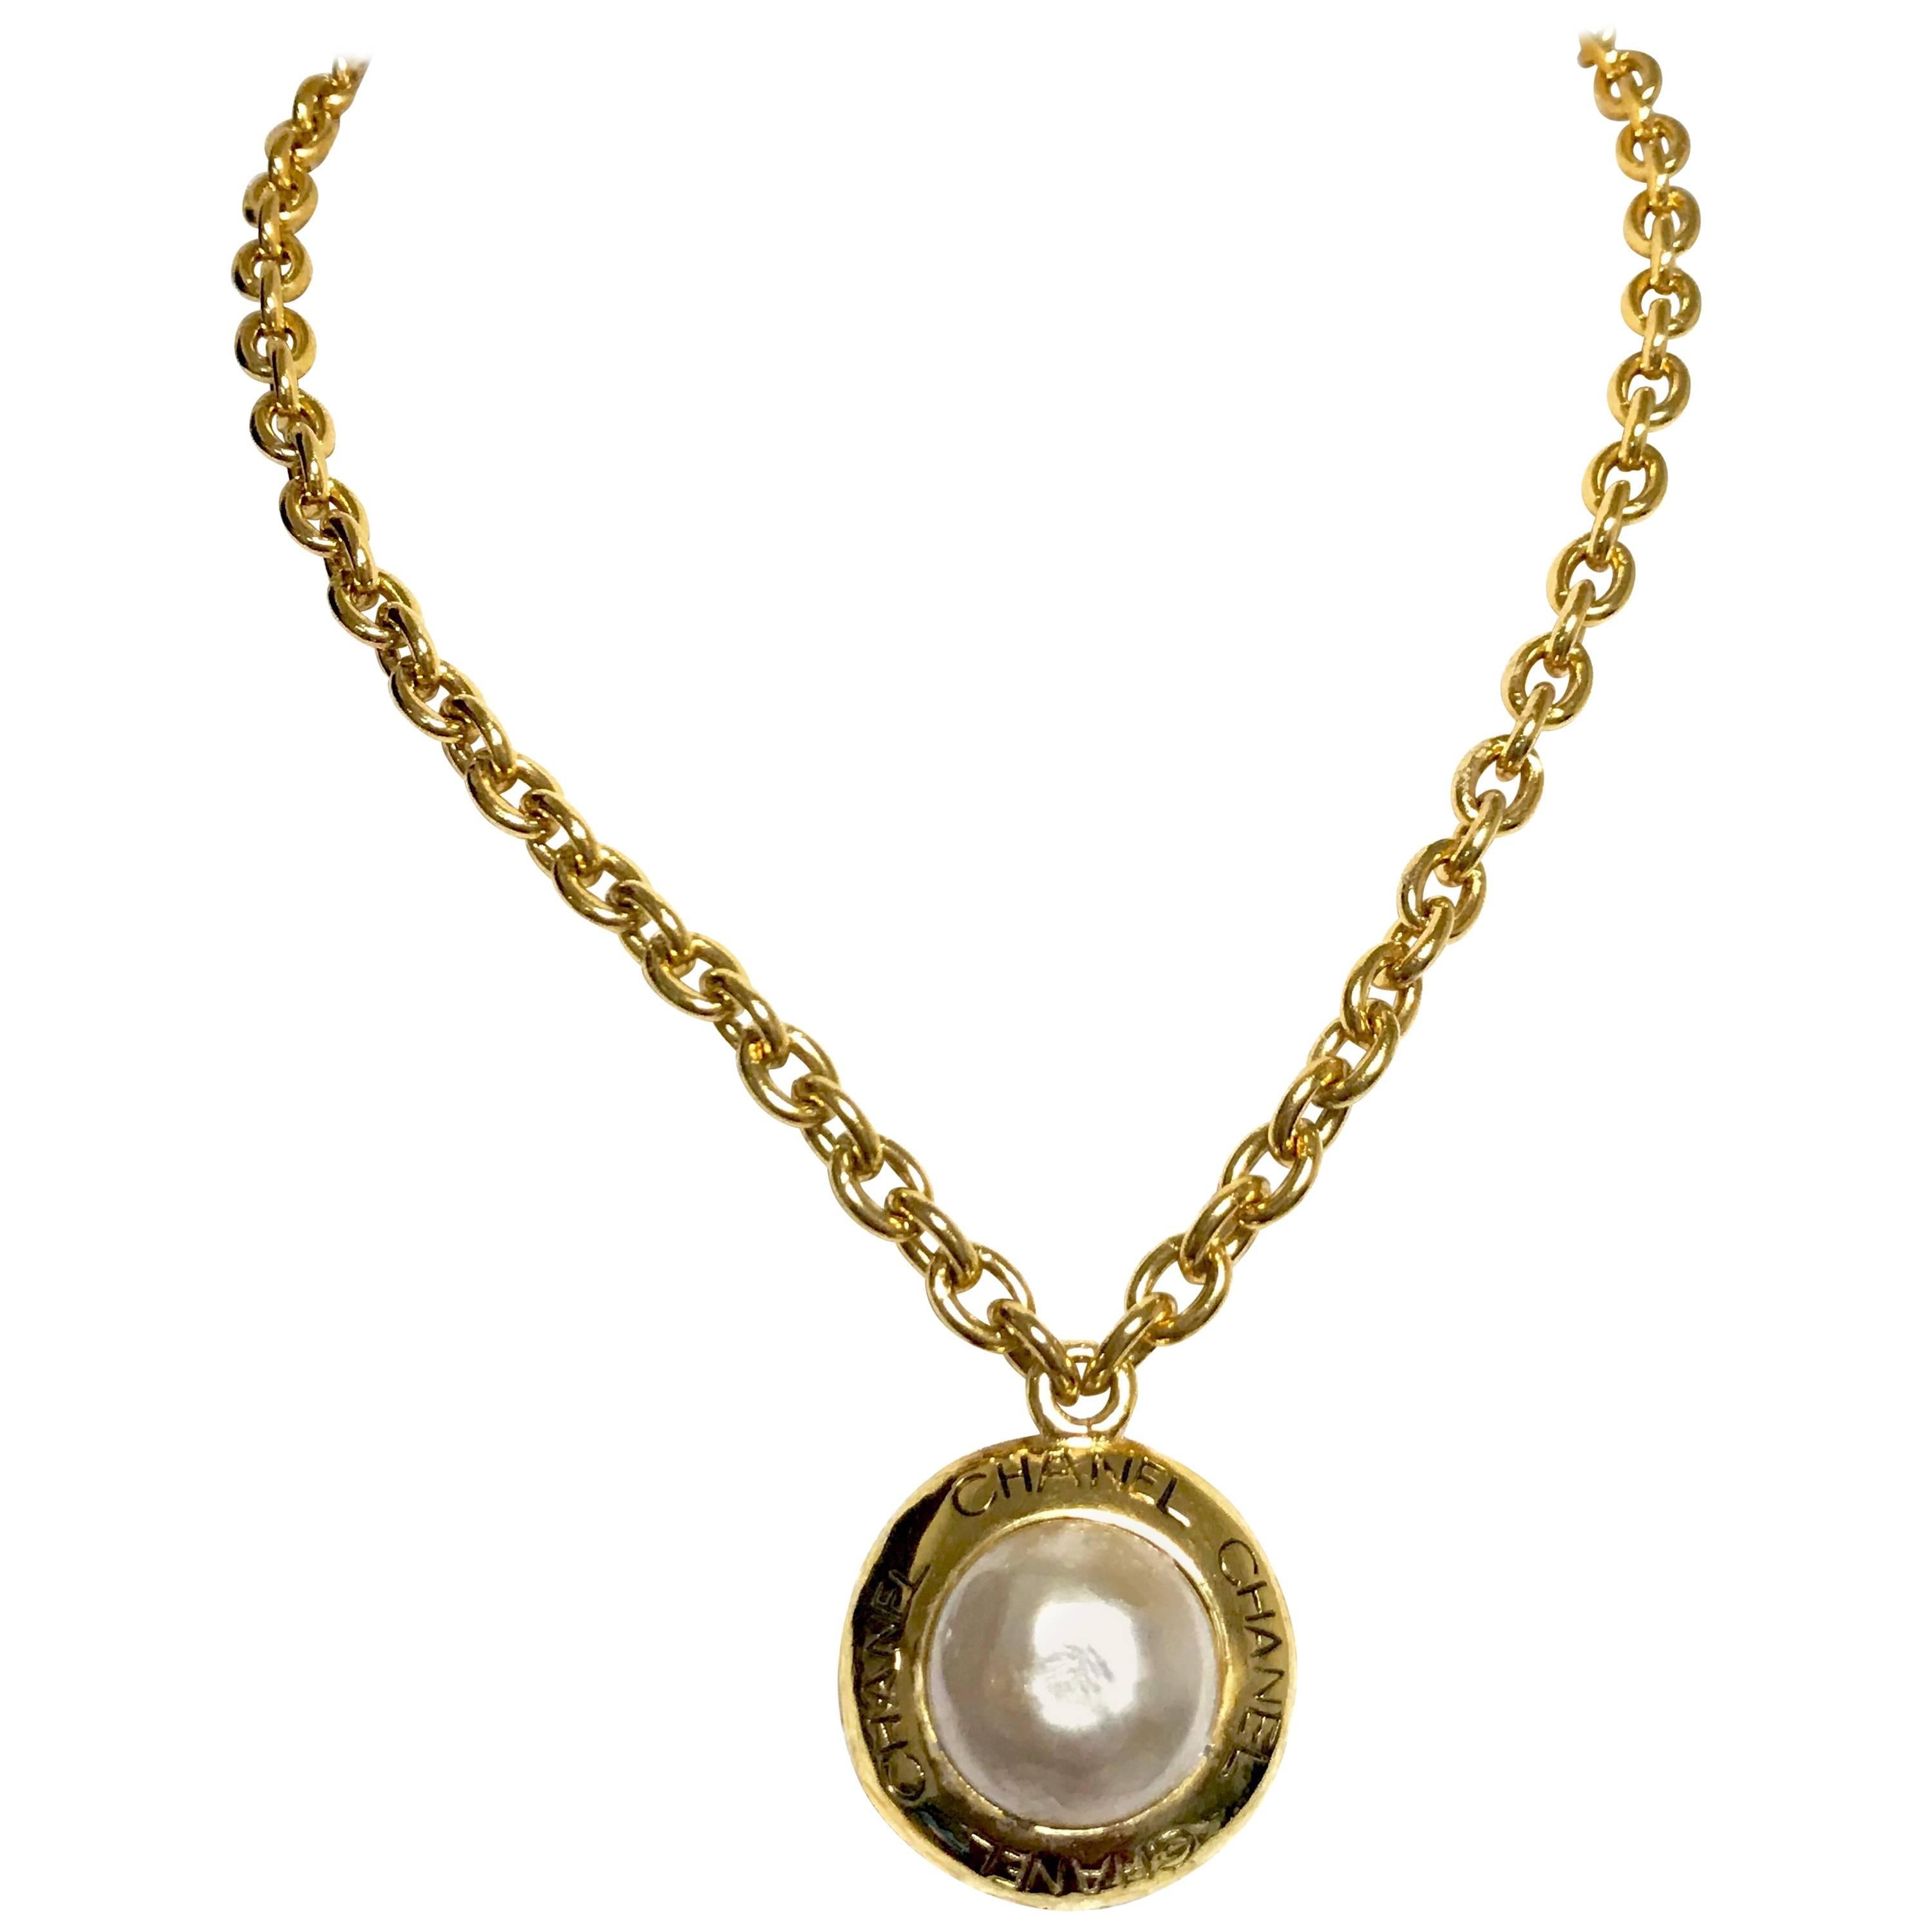 Vintage CHANEL golden chain necklace with round faux pearl and logo pendant top. For Sale